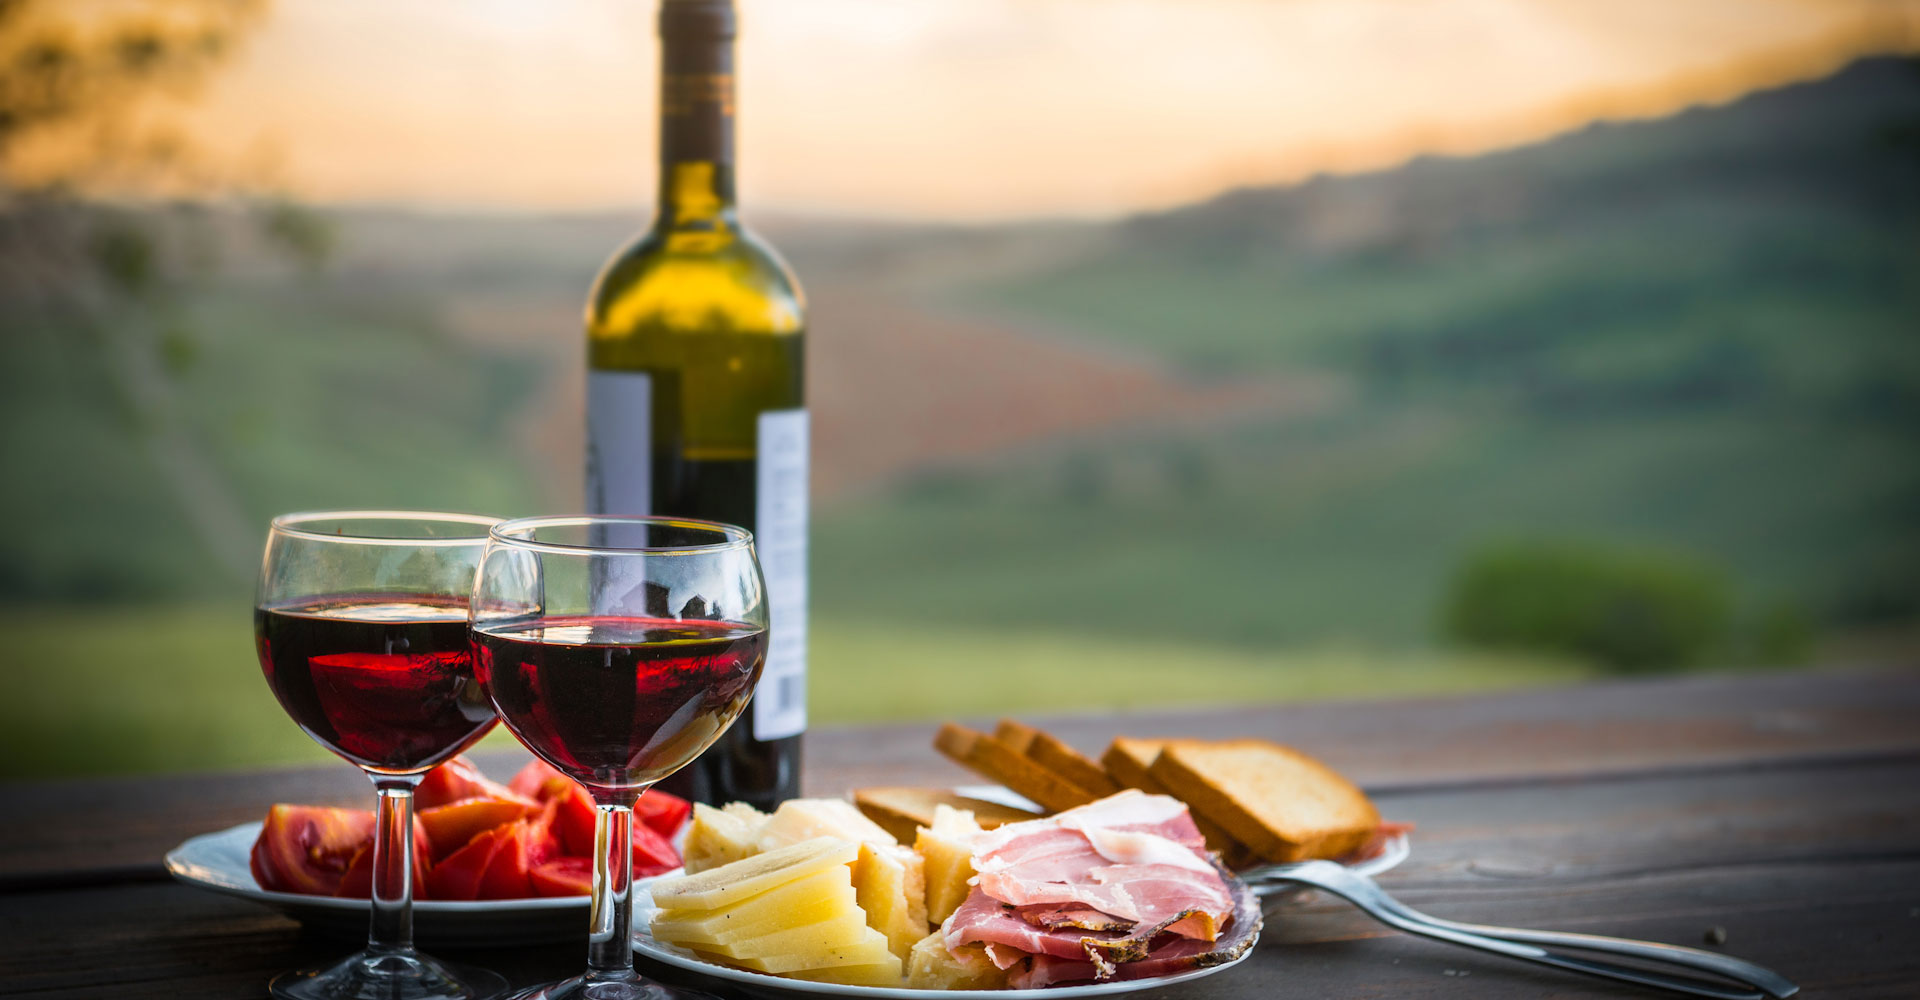 Food and Wine Tasting Events – Etiquette, Locations, and Cost